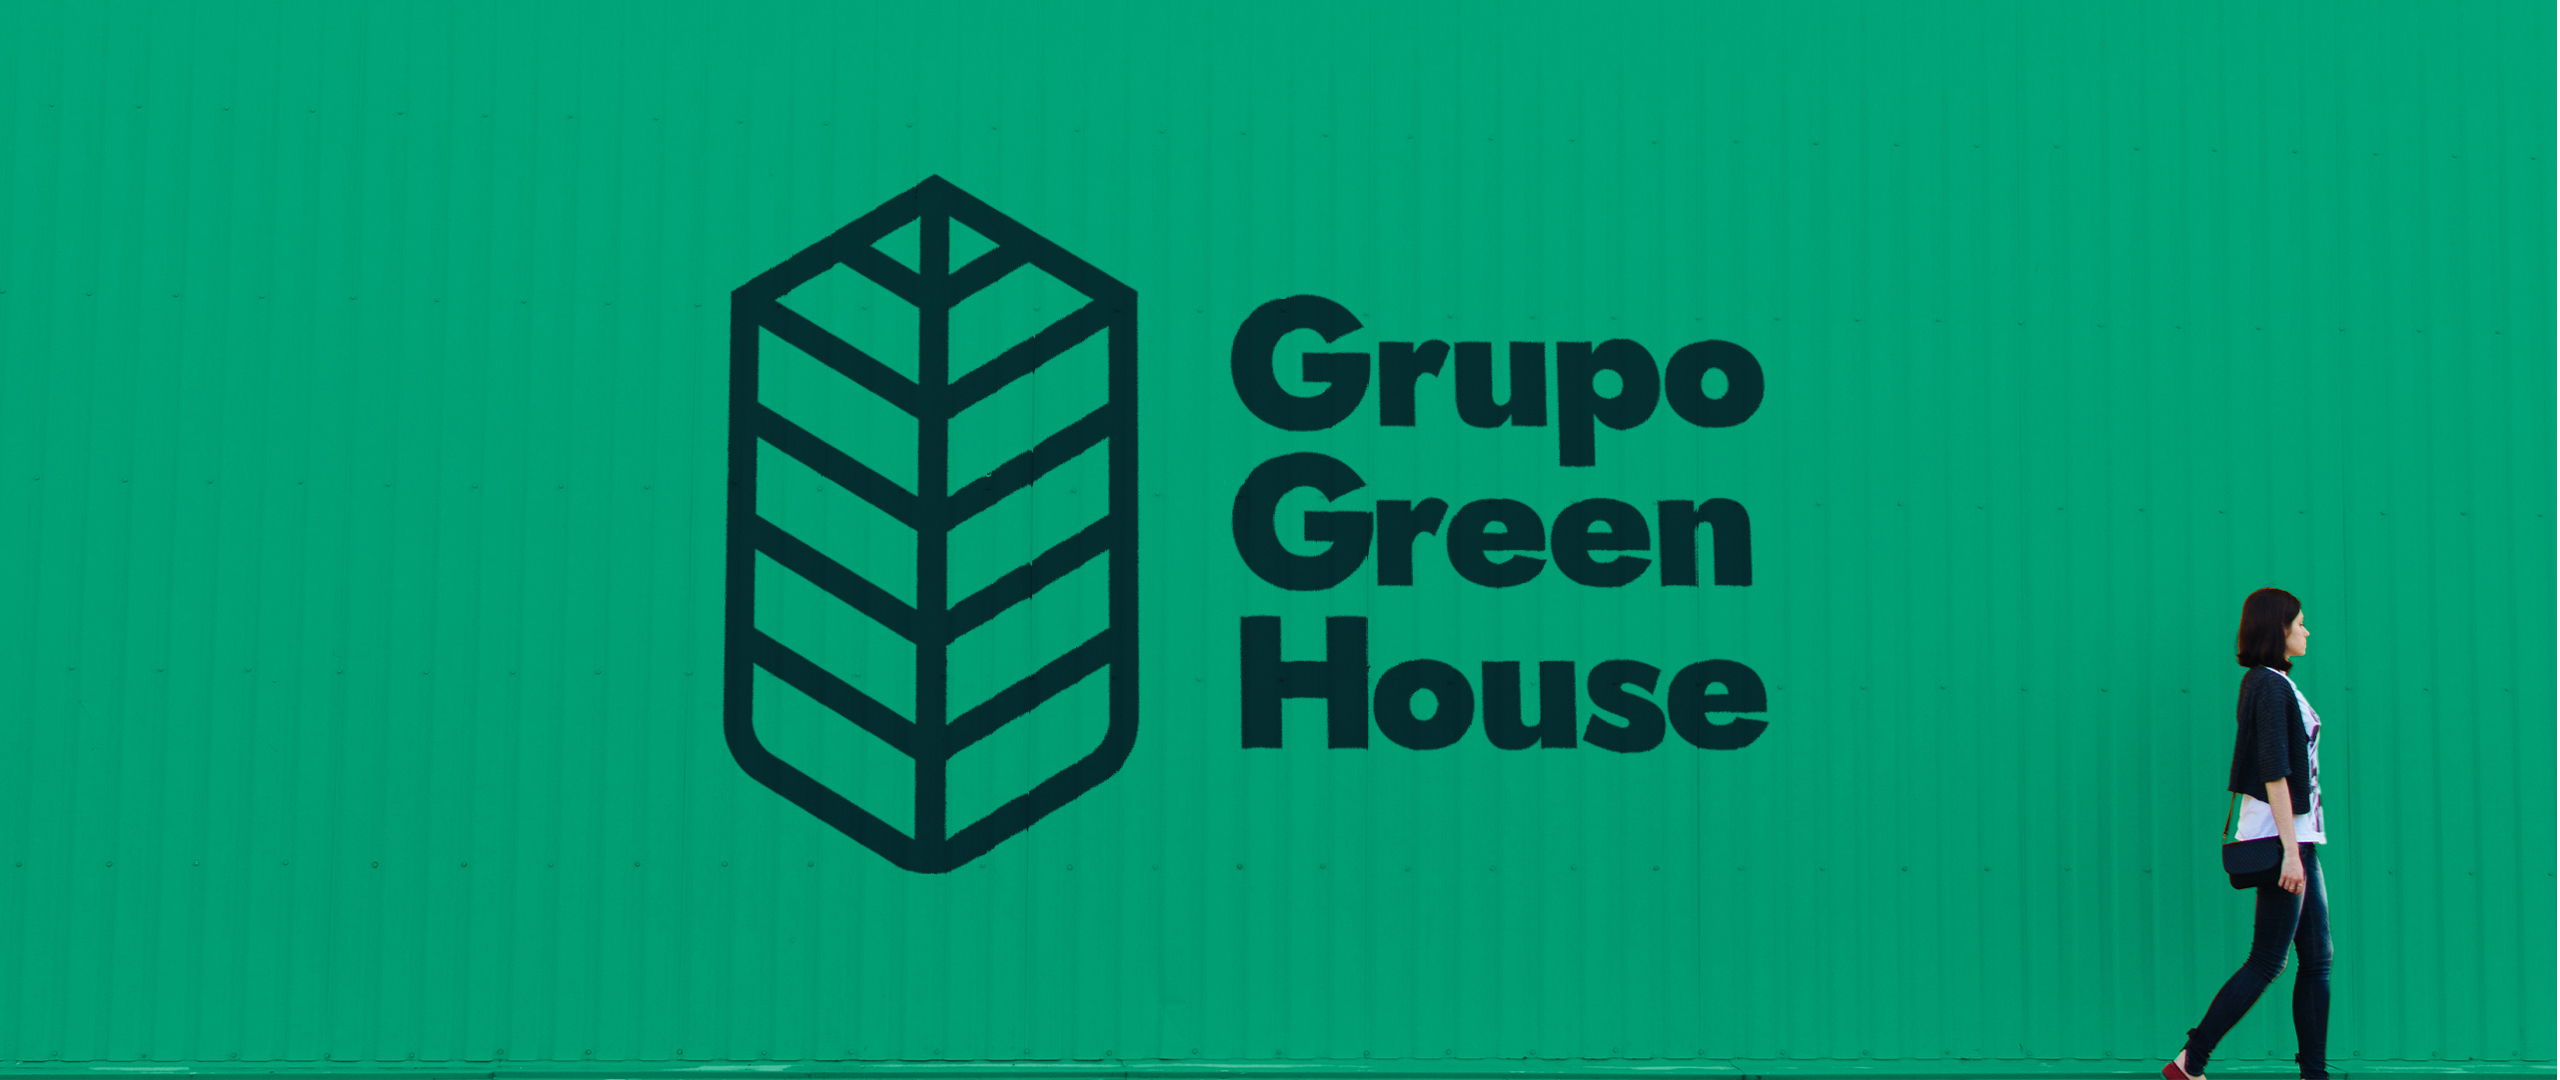 Corporate Identity Project of the Green House Group